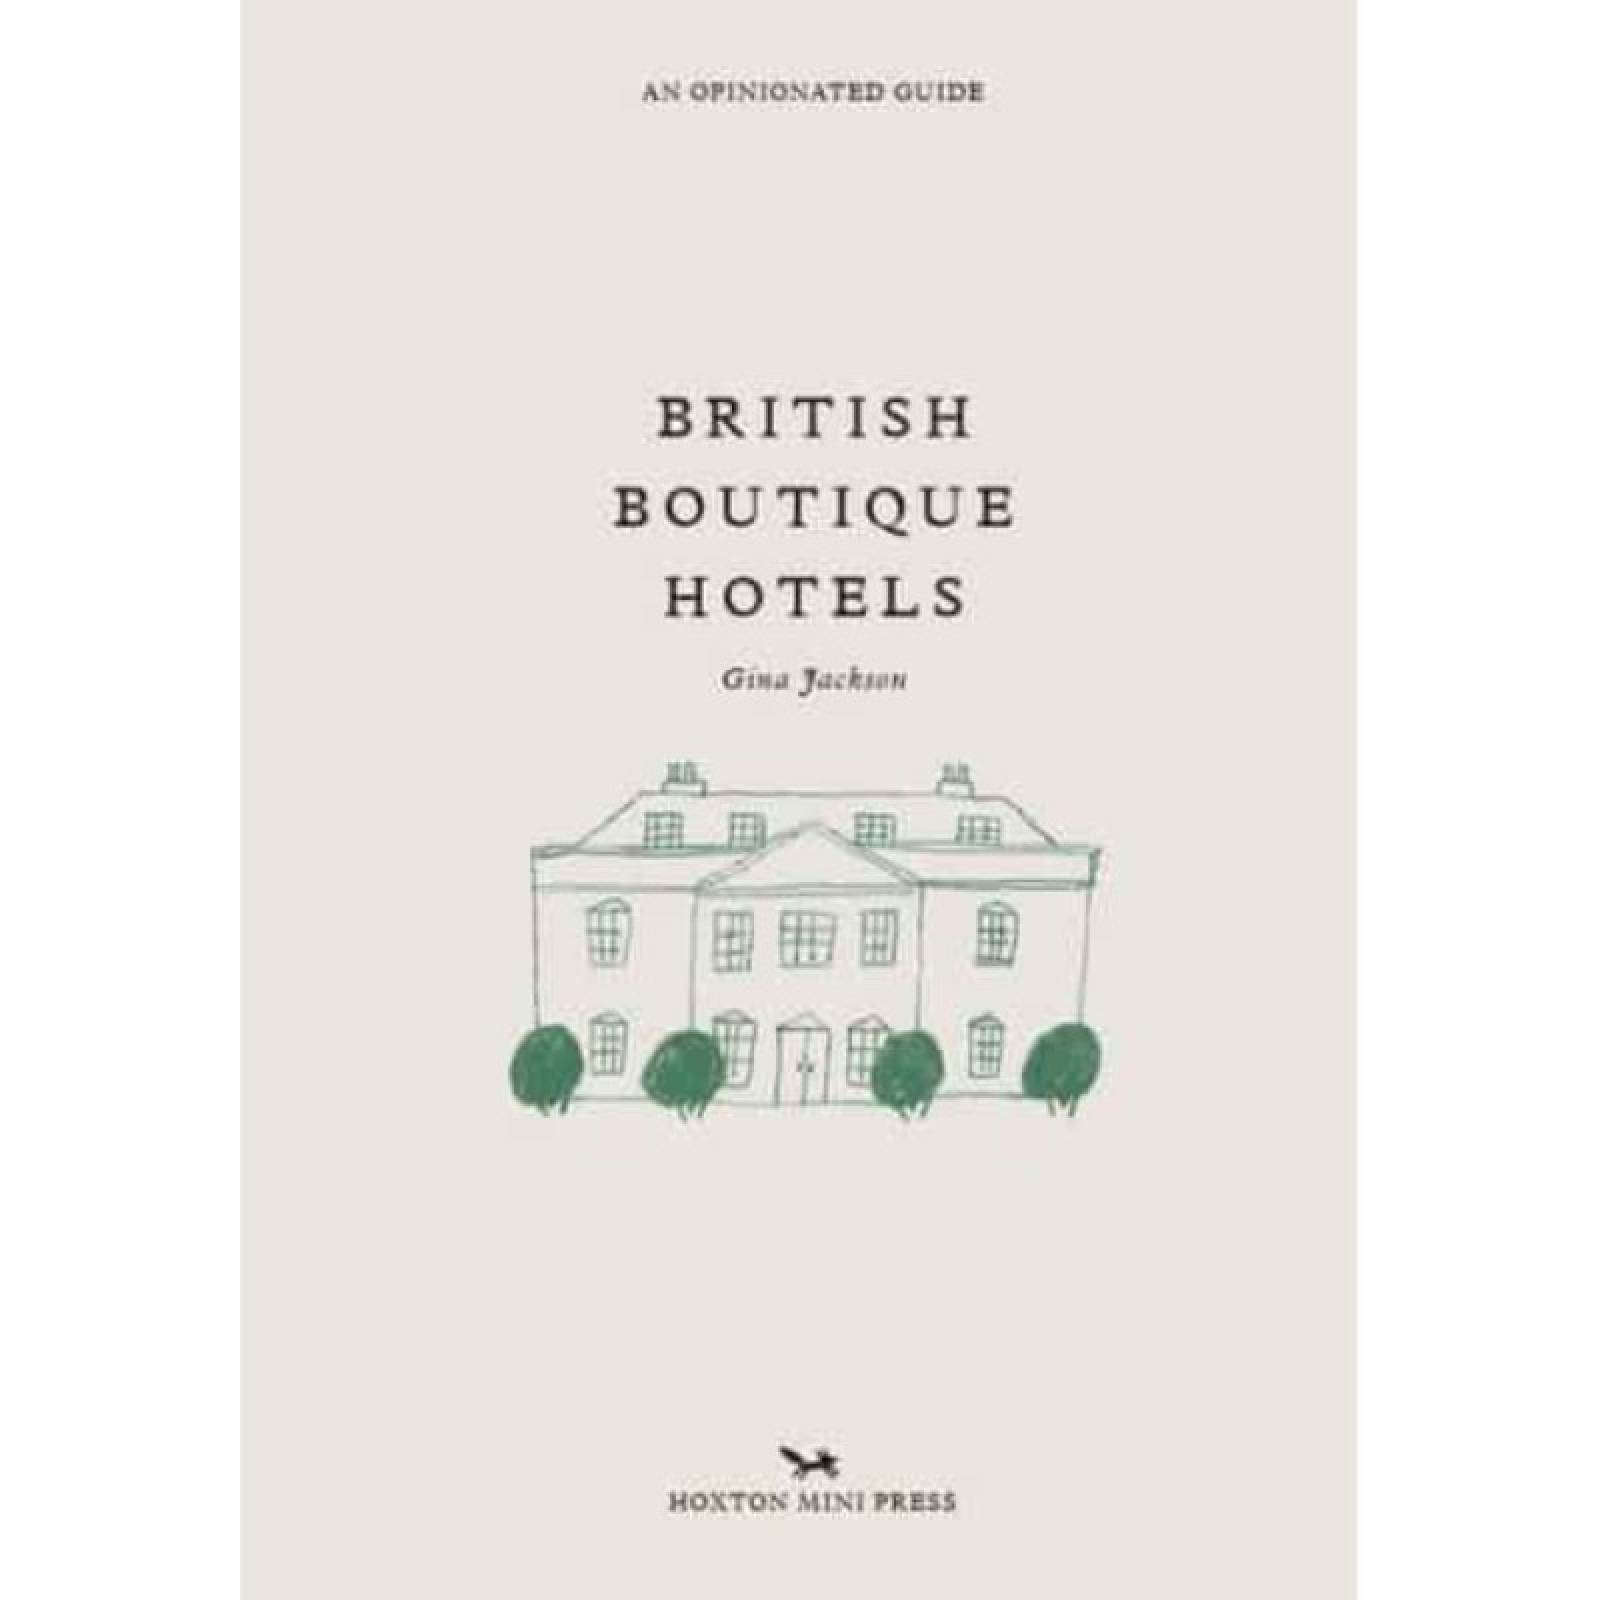 An Opinionated Guide To British Boutique Hotels - Hardback Book